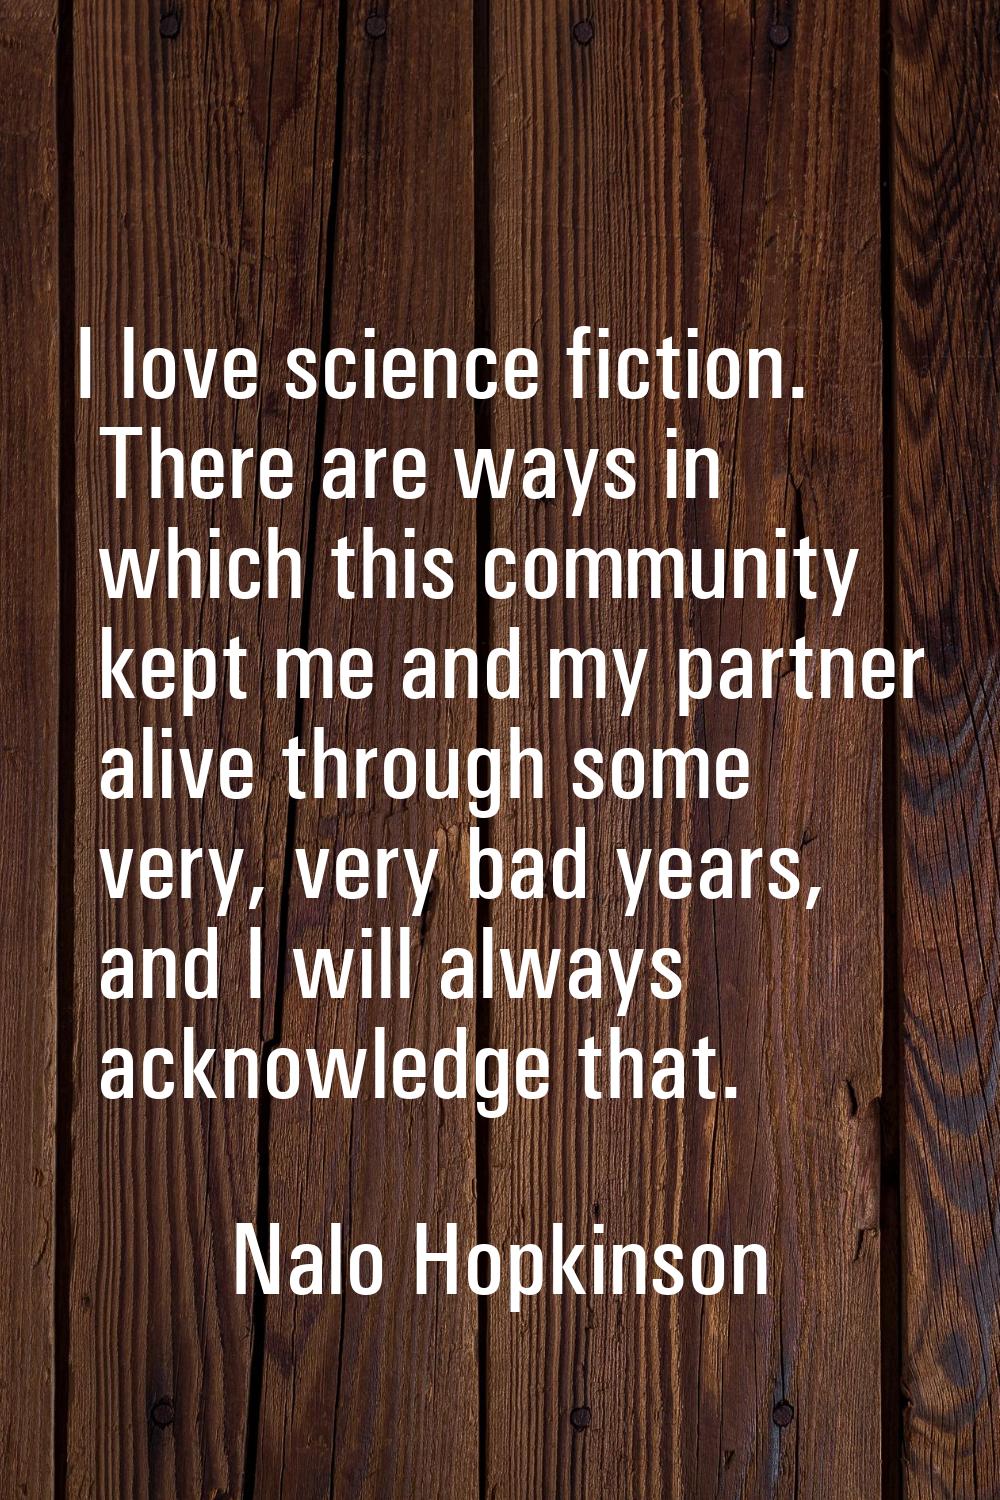 I love science fiction. There are ways in which this community kept me and my partner alive through